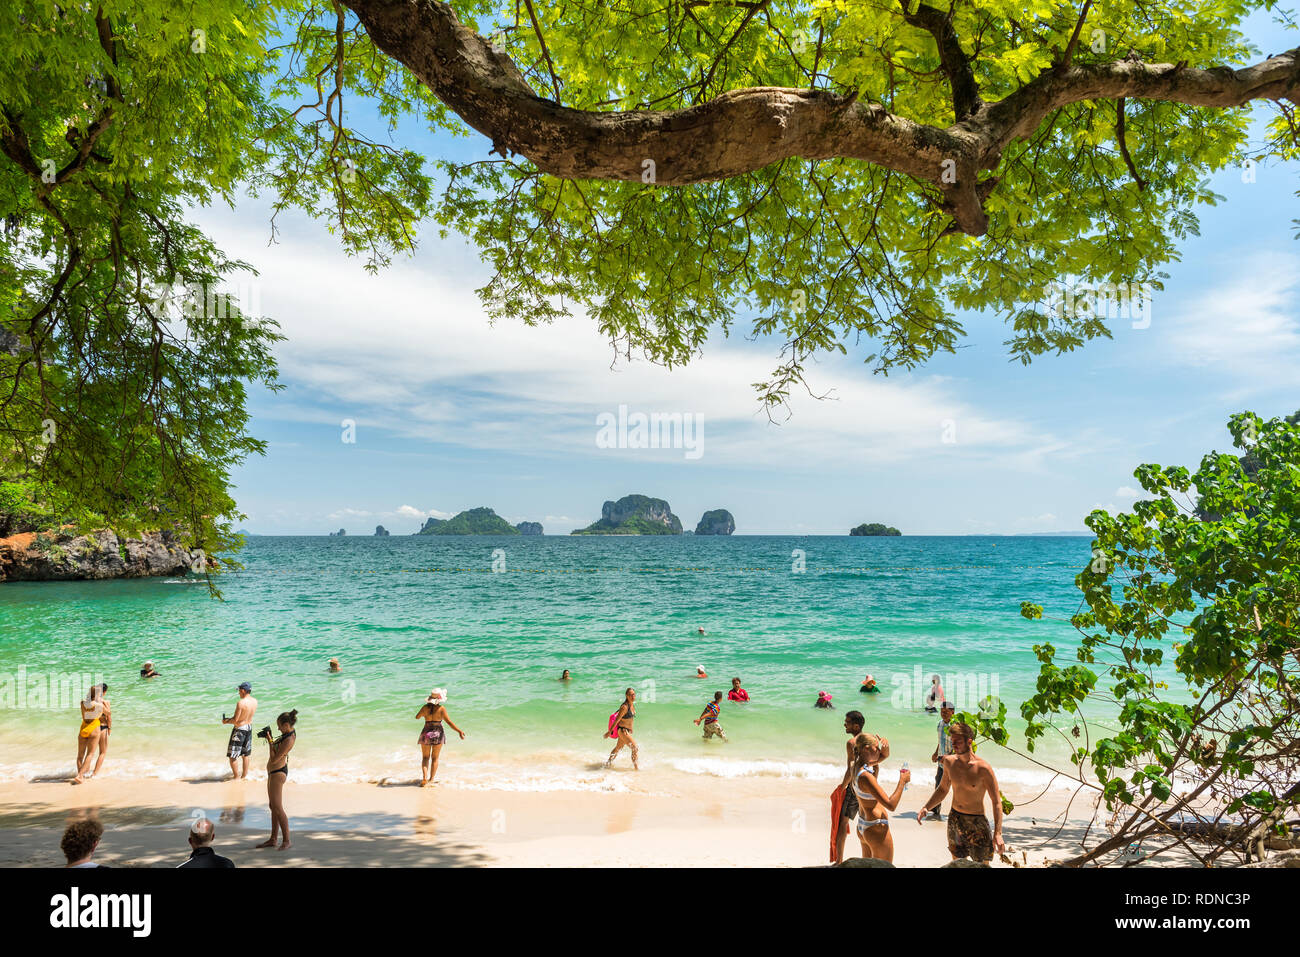 Railay, Thailand - July 3, 2018: tourists swim in the turquoise sea water of Phra Nang (Phranang) Beach with a massive tree branch above. Stock Photo